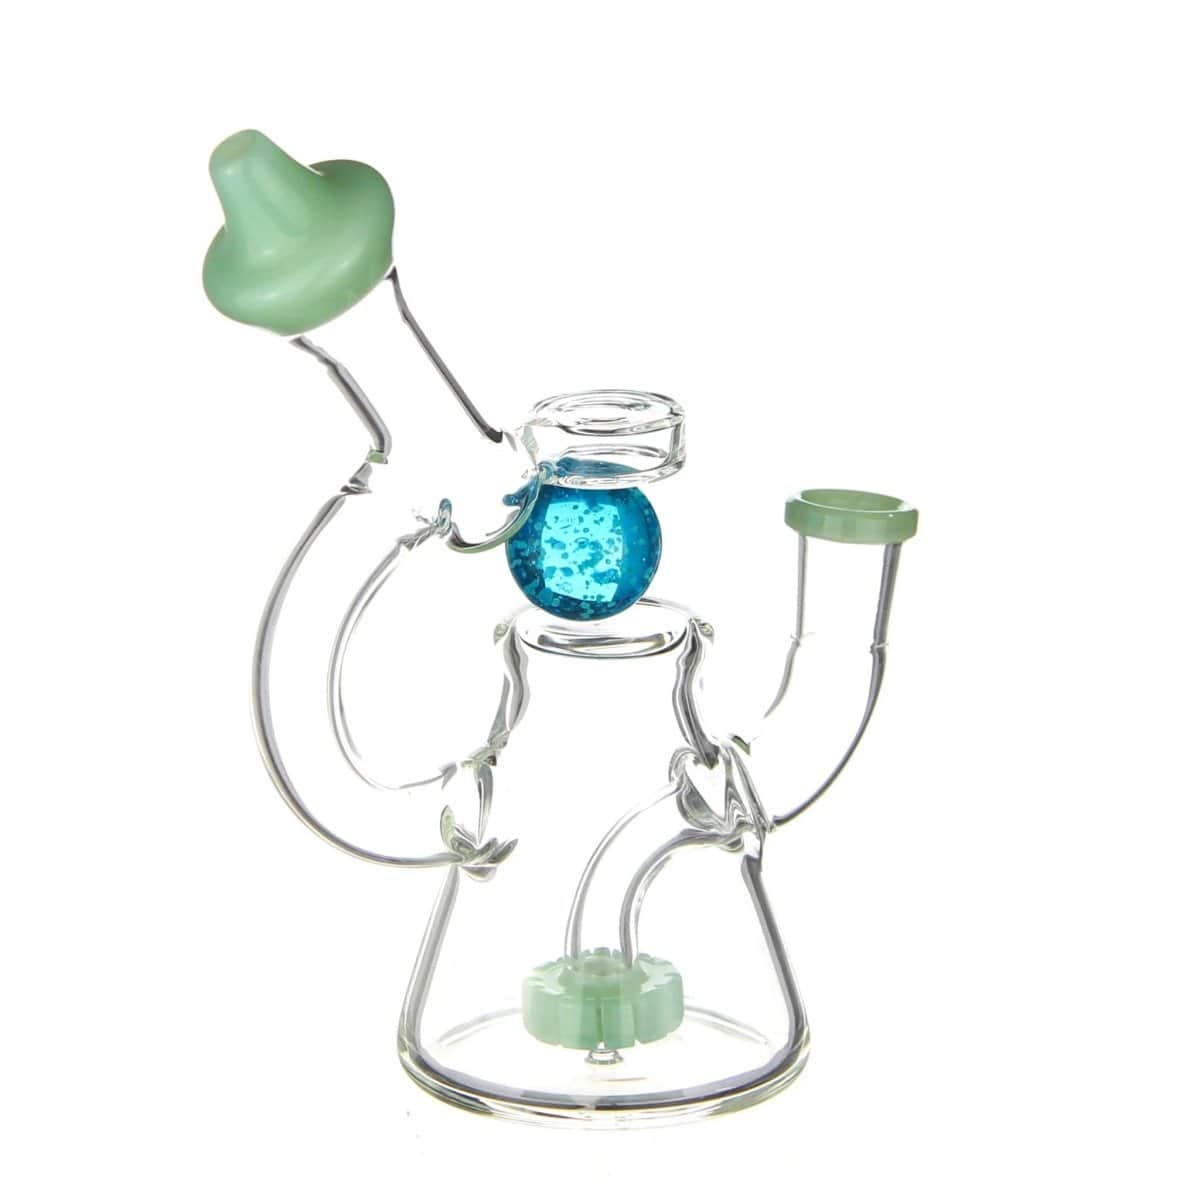 Benext Generation Glass Spinning Marble Bong